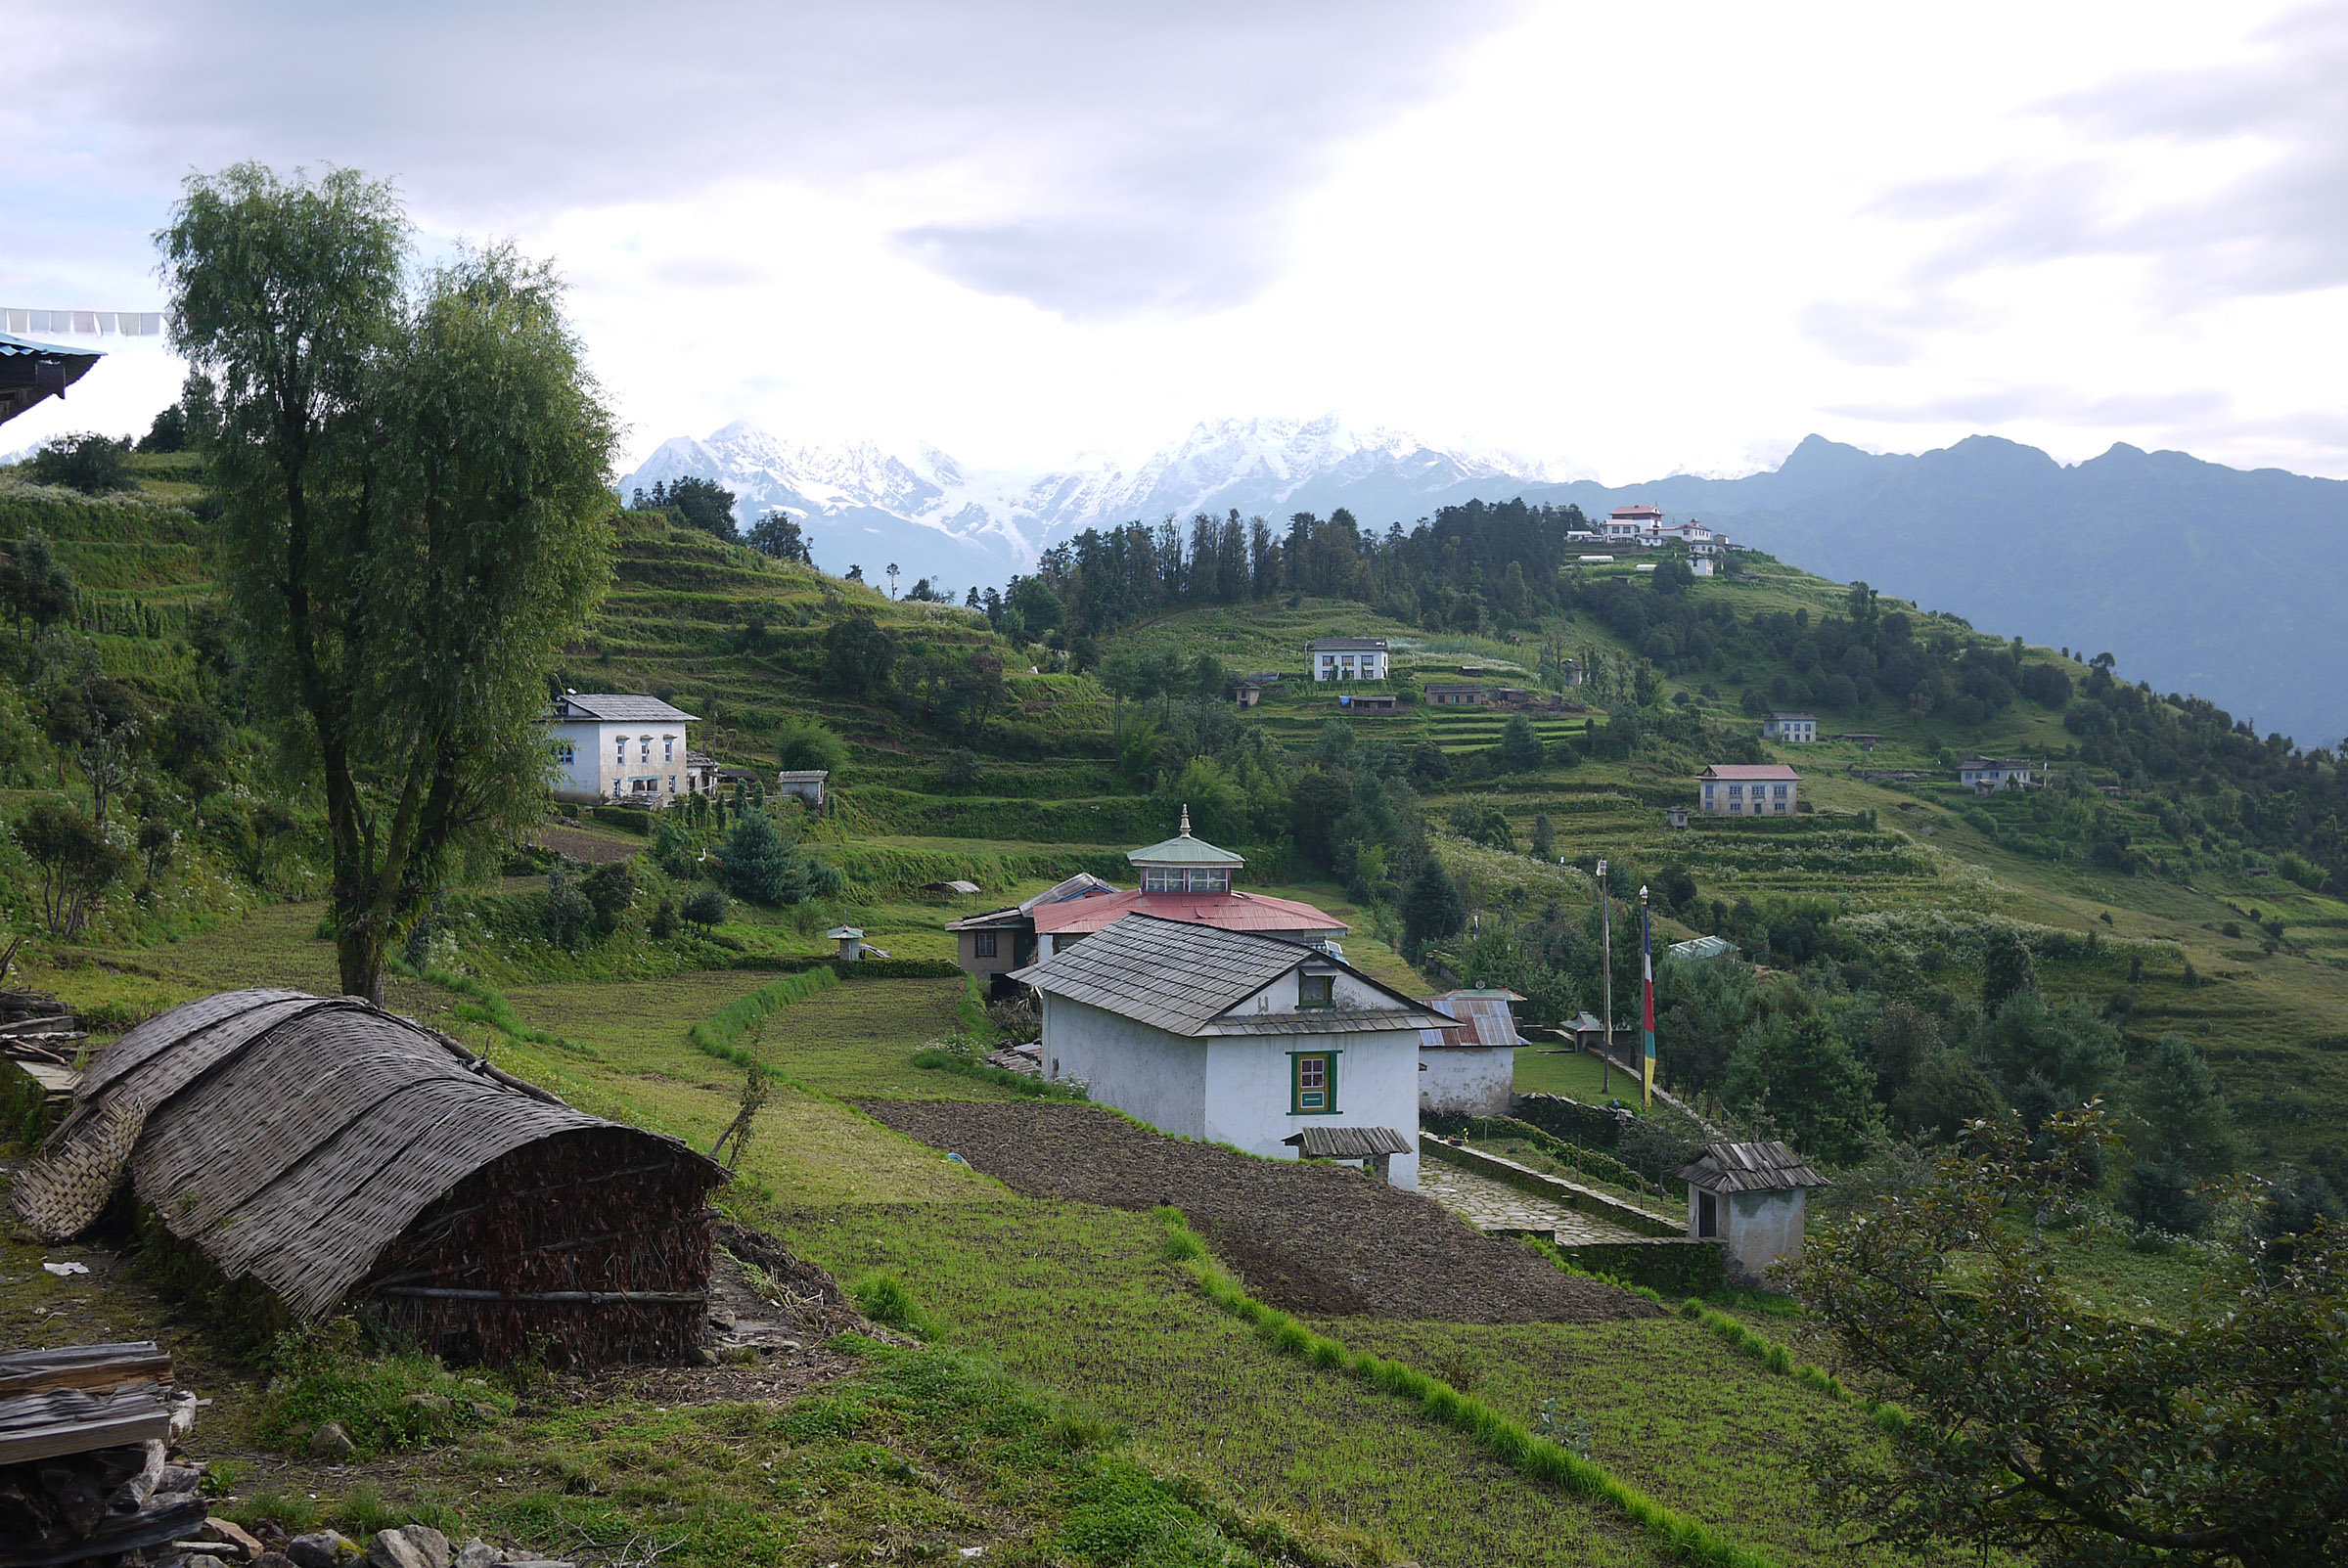 A village consiting of widly spaced houses separated by terraced fields and sparse trees and shrubs; in the distance, there is a mountain range.